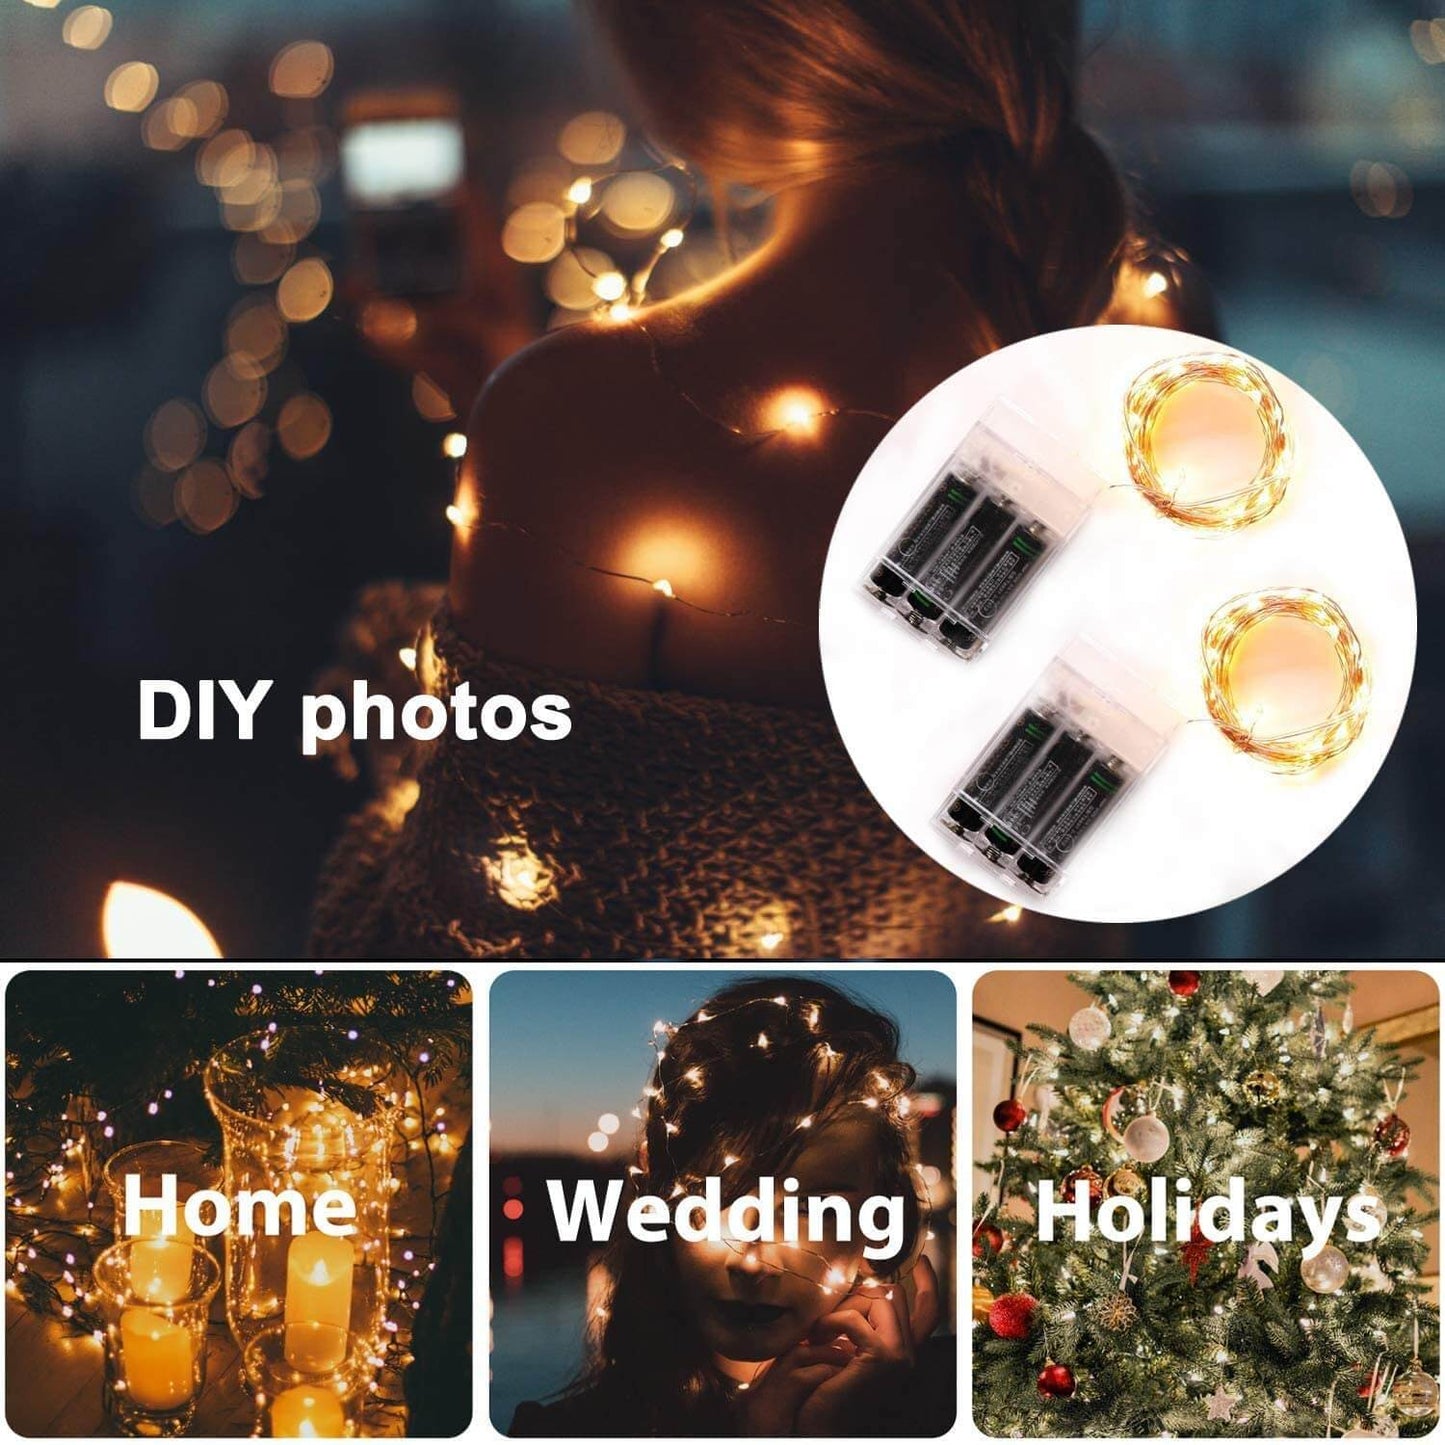 led fairy lights copper wire string 1/2/5/10m light beads holiday outdoor lamp strip garland for christmas tree wedding party home lighting decoration